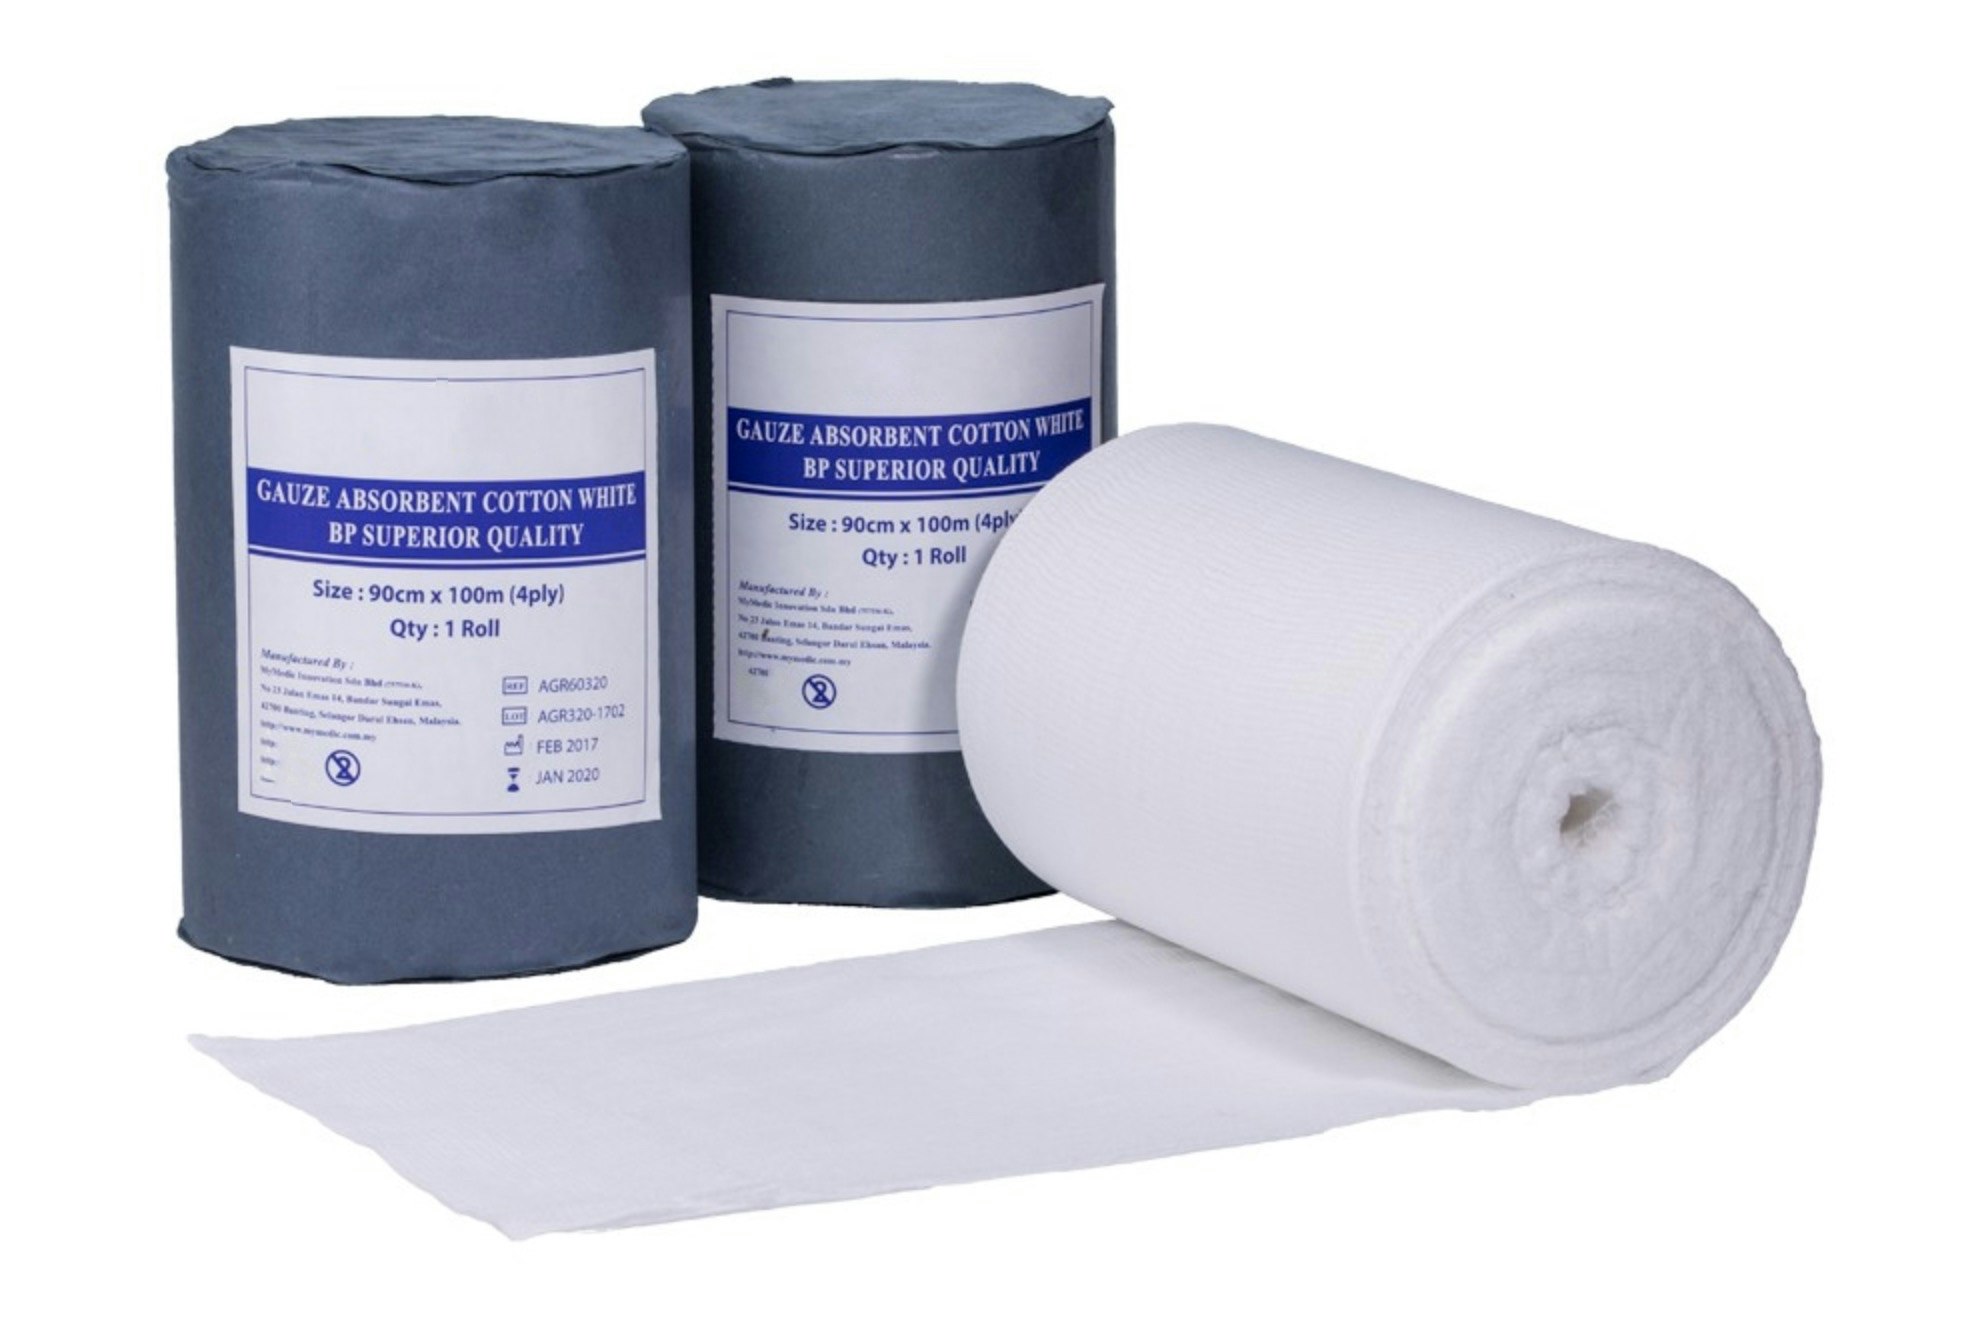 US COTTON 79410016 Absorbent Cotton Roll 16oz